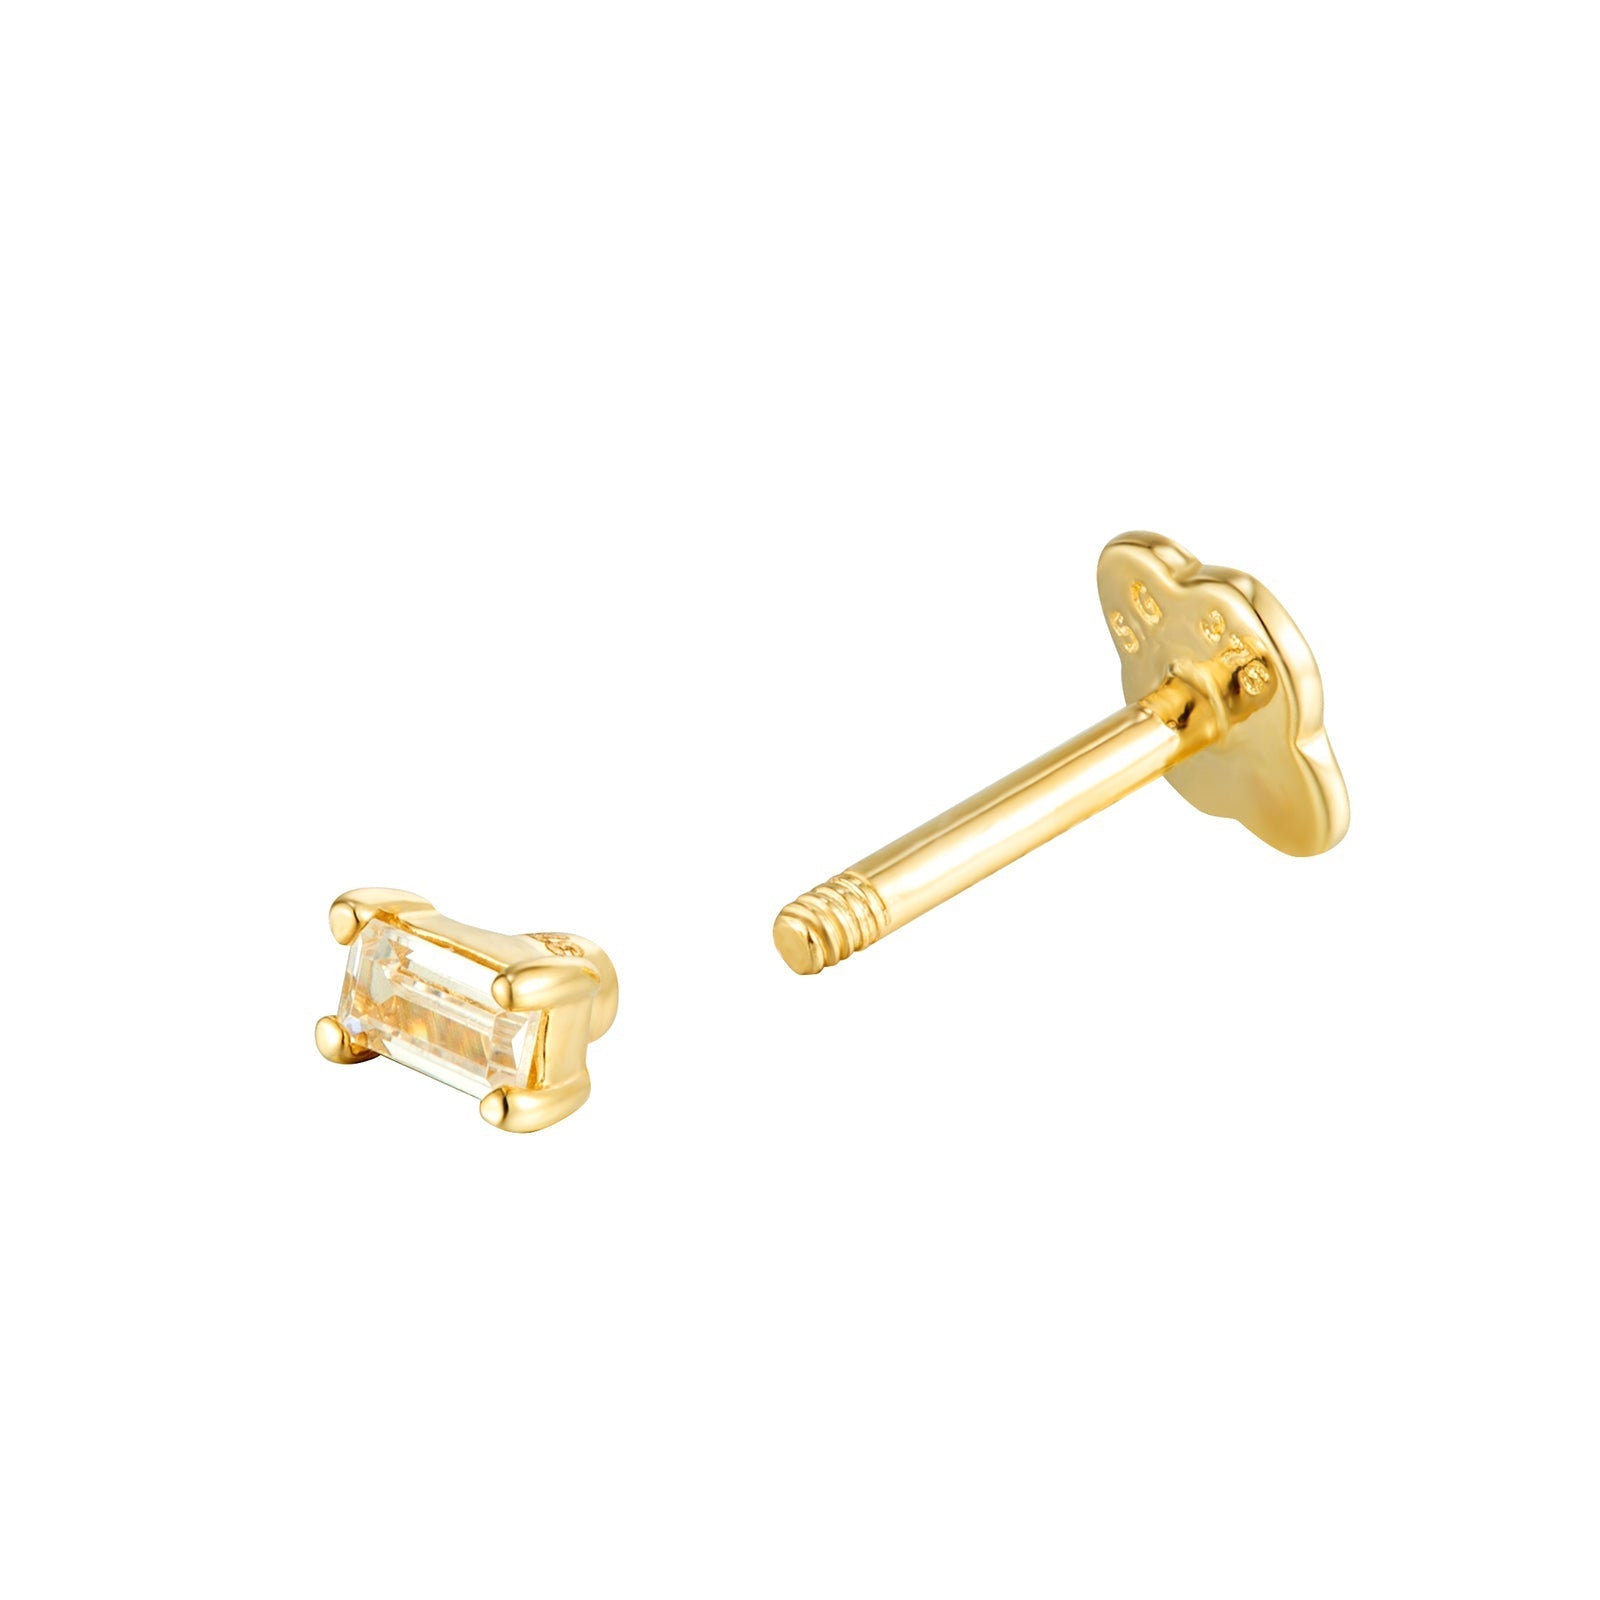 9ct Solid Gold Labret Stud Earring - seolgold